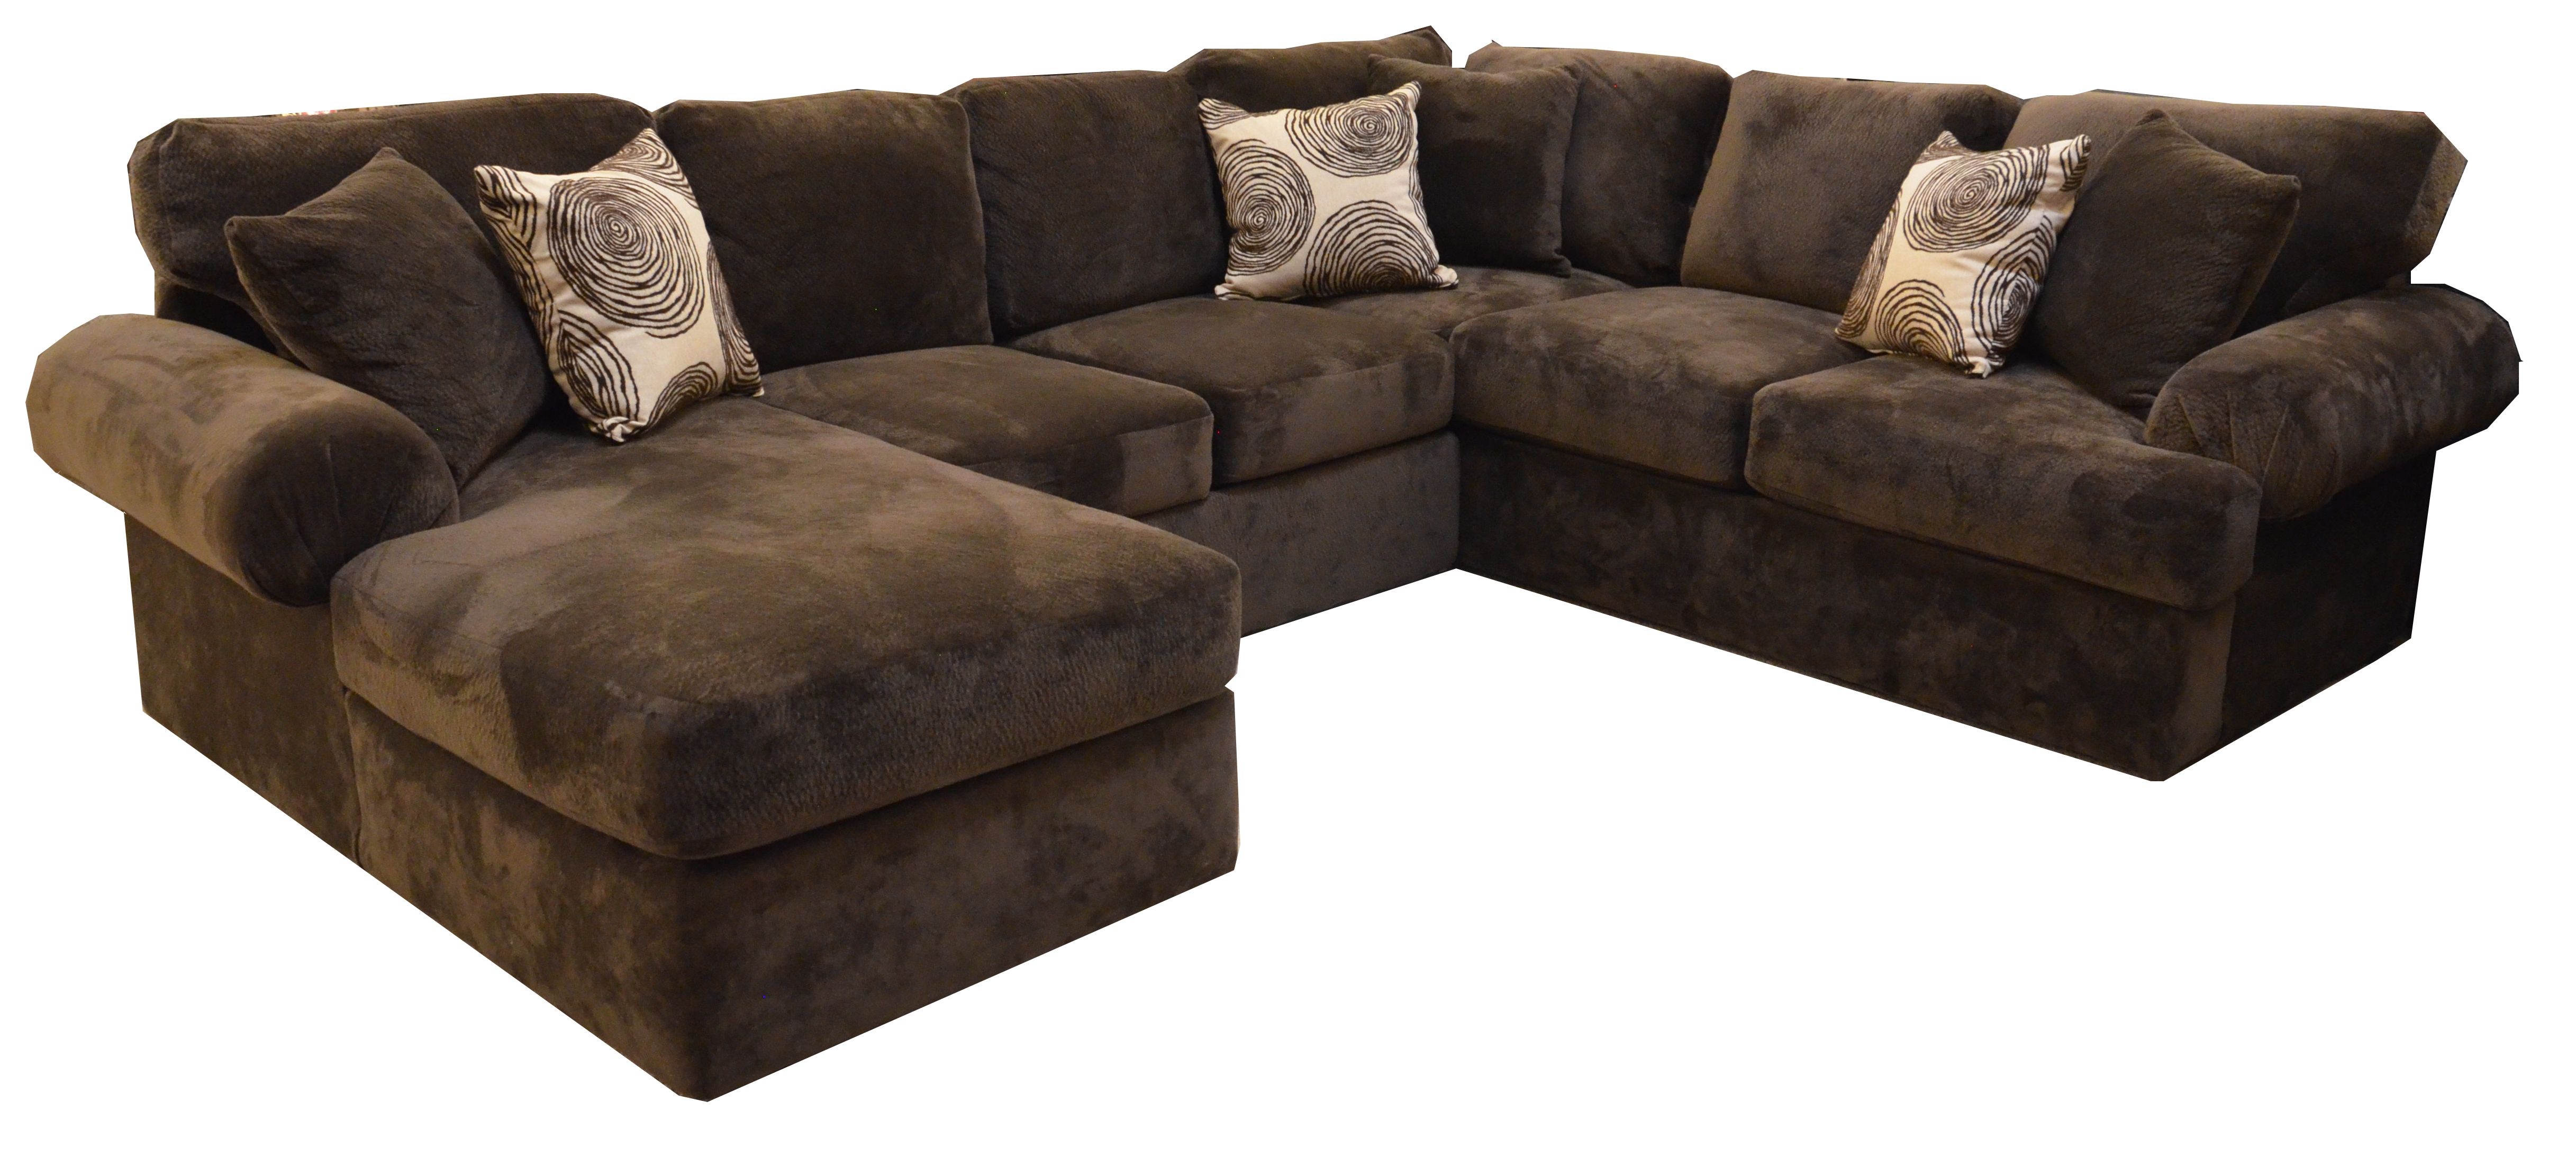 Wonderful Bradley Sectional Sofa 54 For Your 7 Seat Sectional Sofa With Bradley Sectional Sofa (View 3 of 12)